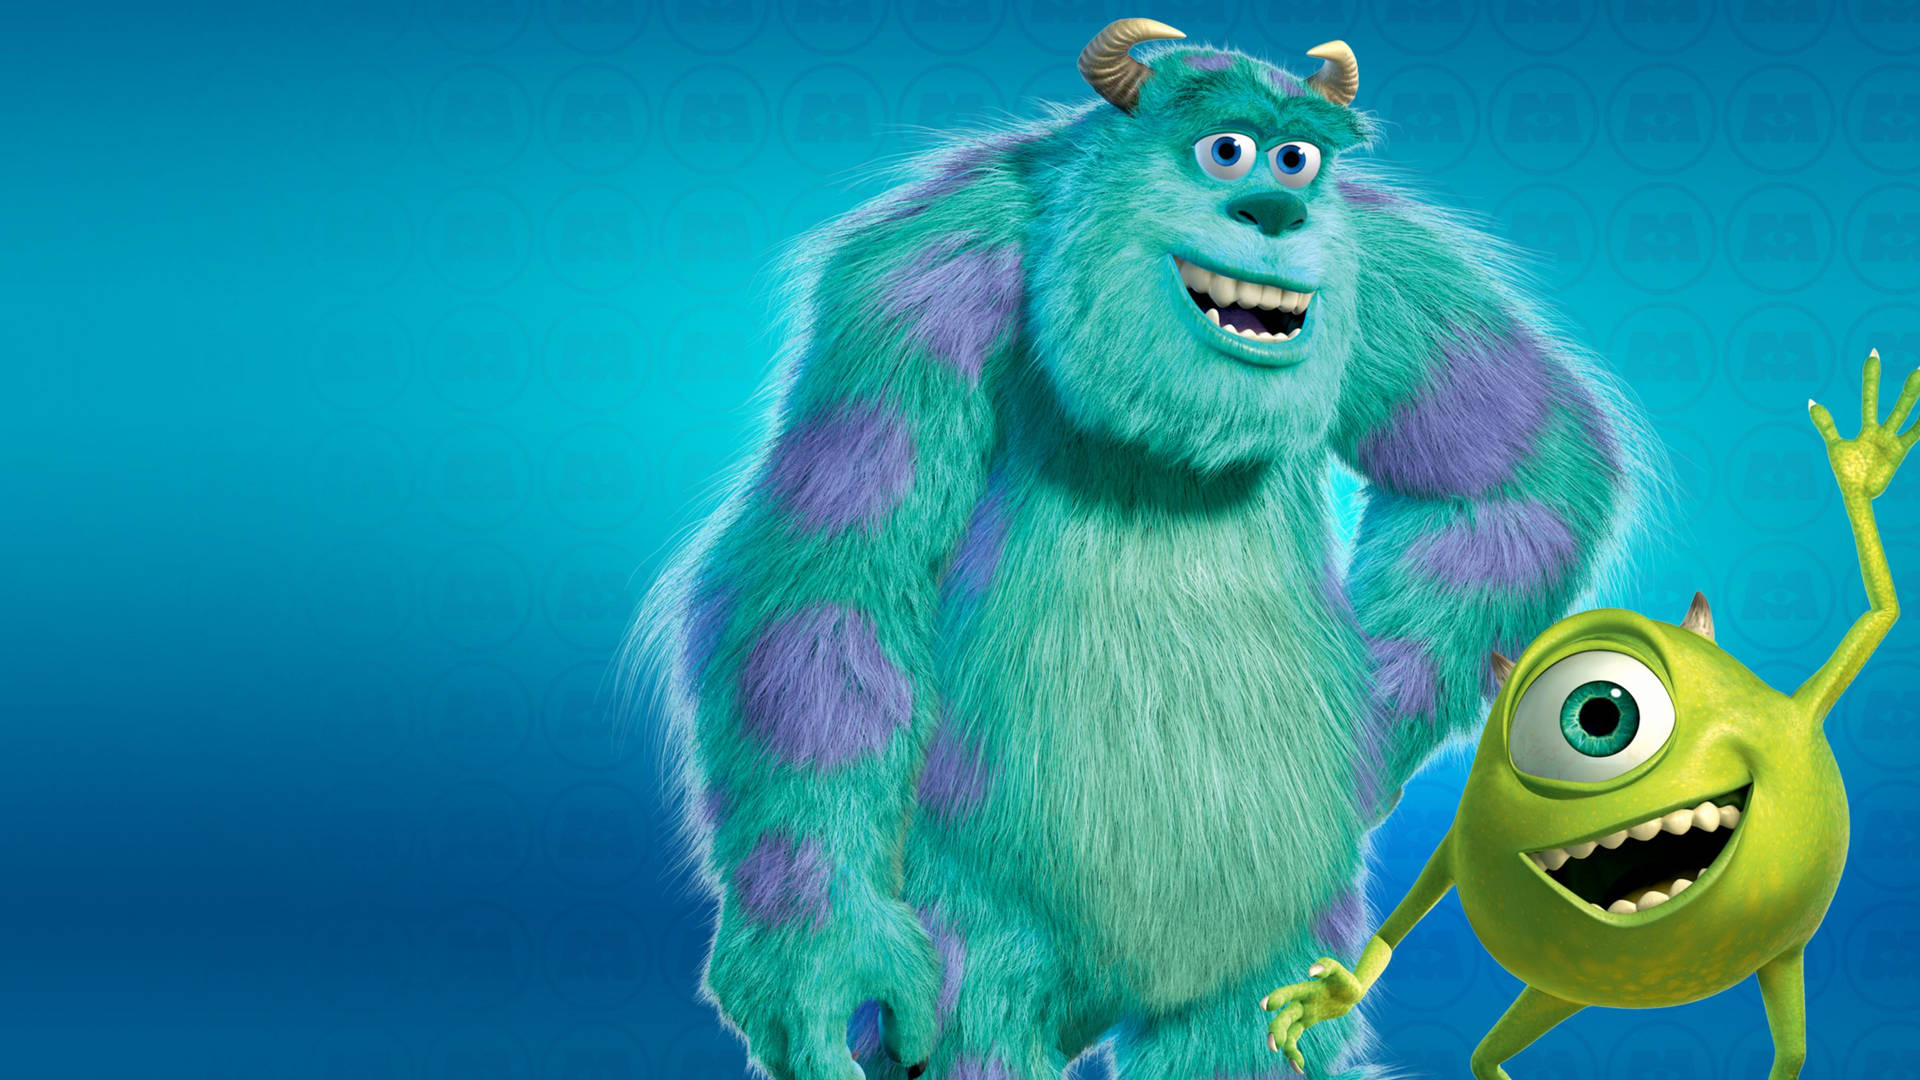 Sulley and Mike Wazowski Wallpaper